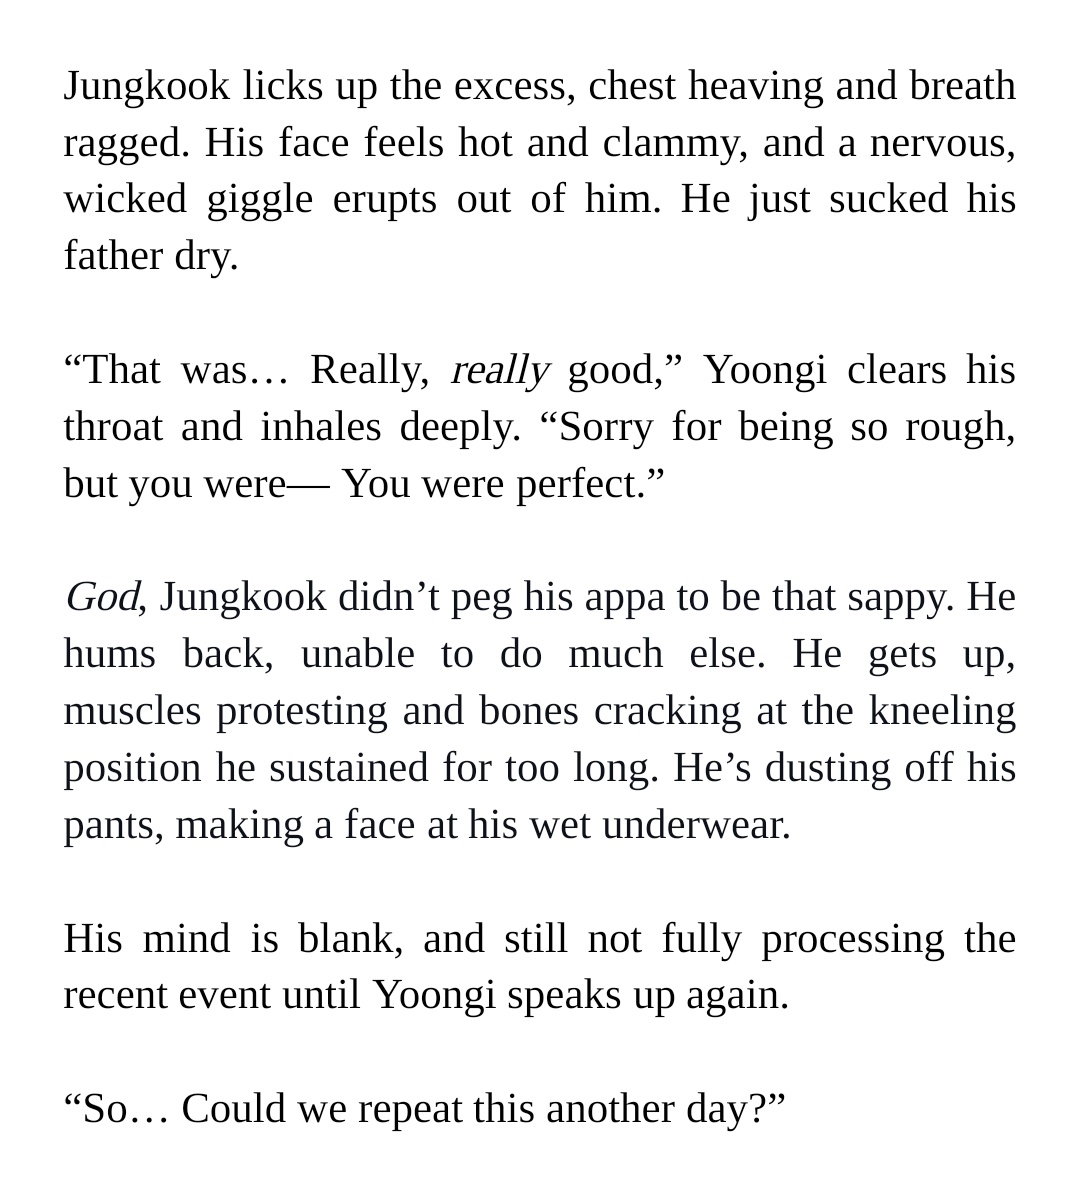 Jungkook licks up the excess, chest heaving and breath ragged. His face feels hot and clammy, and a nervous, wicked giggle erupts out of him. He just sucked his father dry.


“That was… Really, really good,” Yoongi clears his throat and inhales deeply. “Sorry for being so rough, but you were— You were perfect.”


God, Jungkook didn’t peg his appa to be that sappy. He hums back, unable to do much else. He gets up, muscles protesting and bones cracking at the kneeling position he sustained for too long. He’s dusting off his pants, making a face at his wet underwear. 


His mind is blank, and still not fully processing the recent event until Yoongi speaks up again.


“So… Could we repeat this another day?”